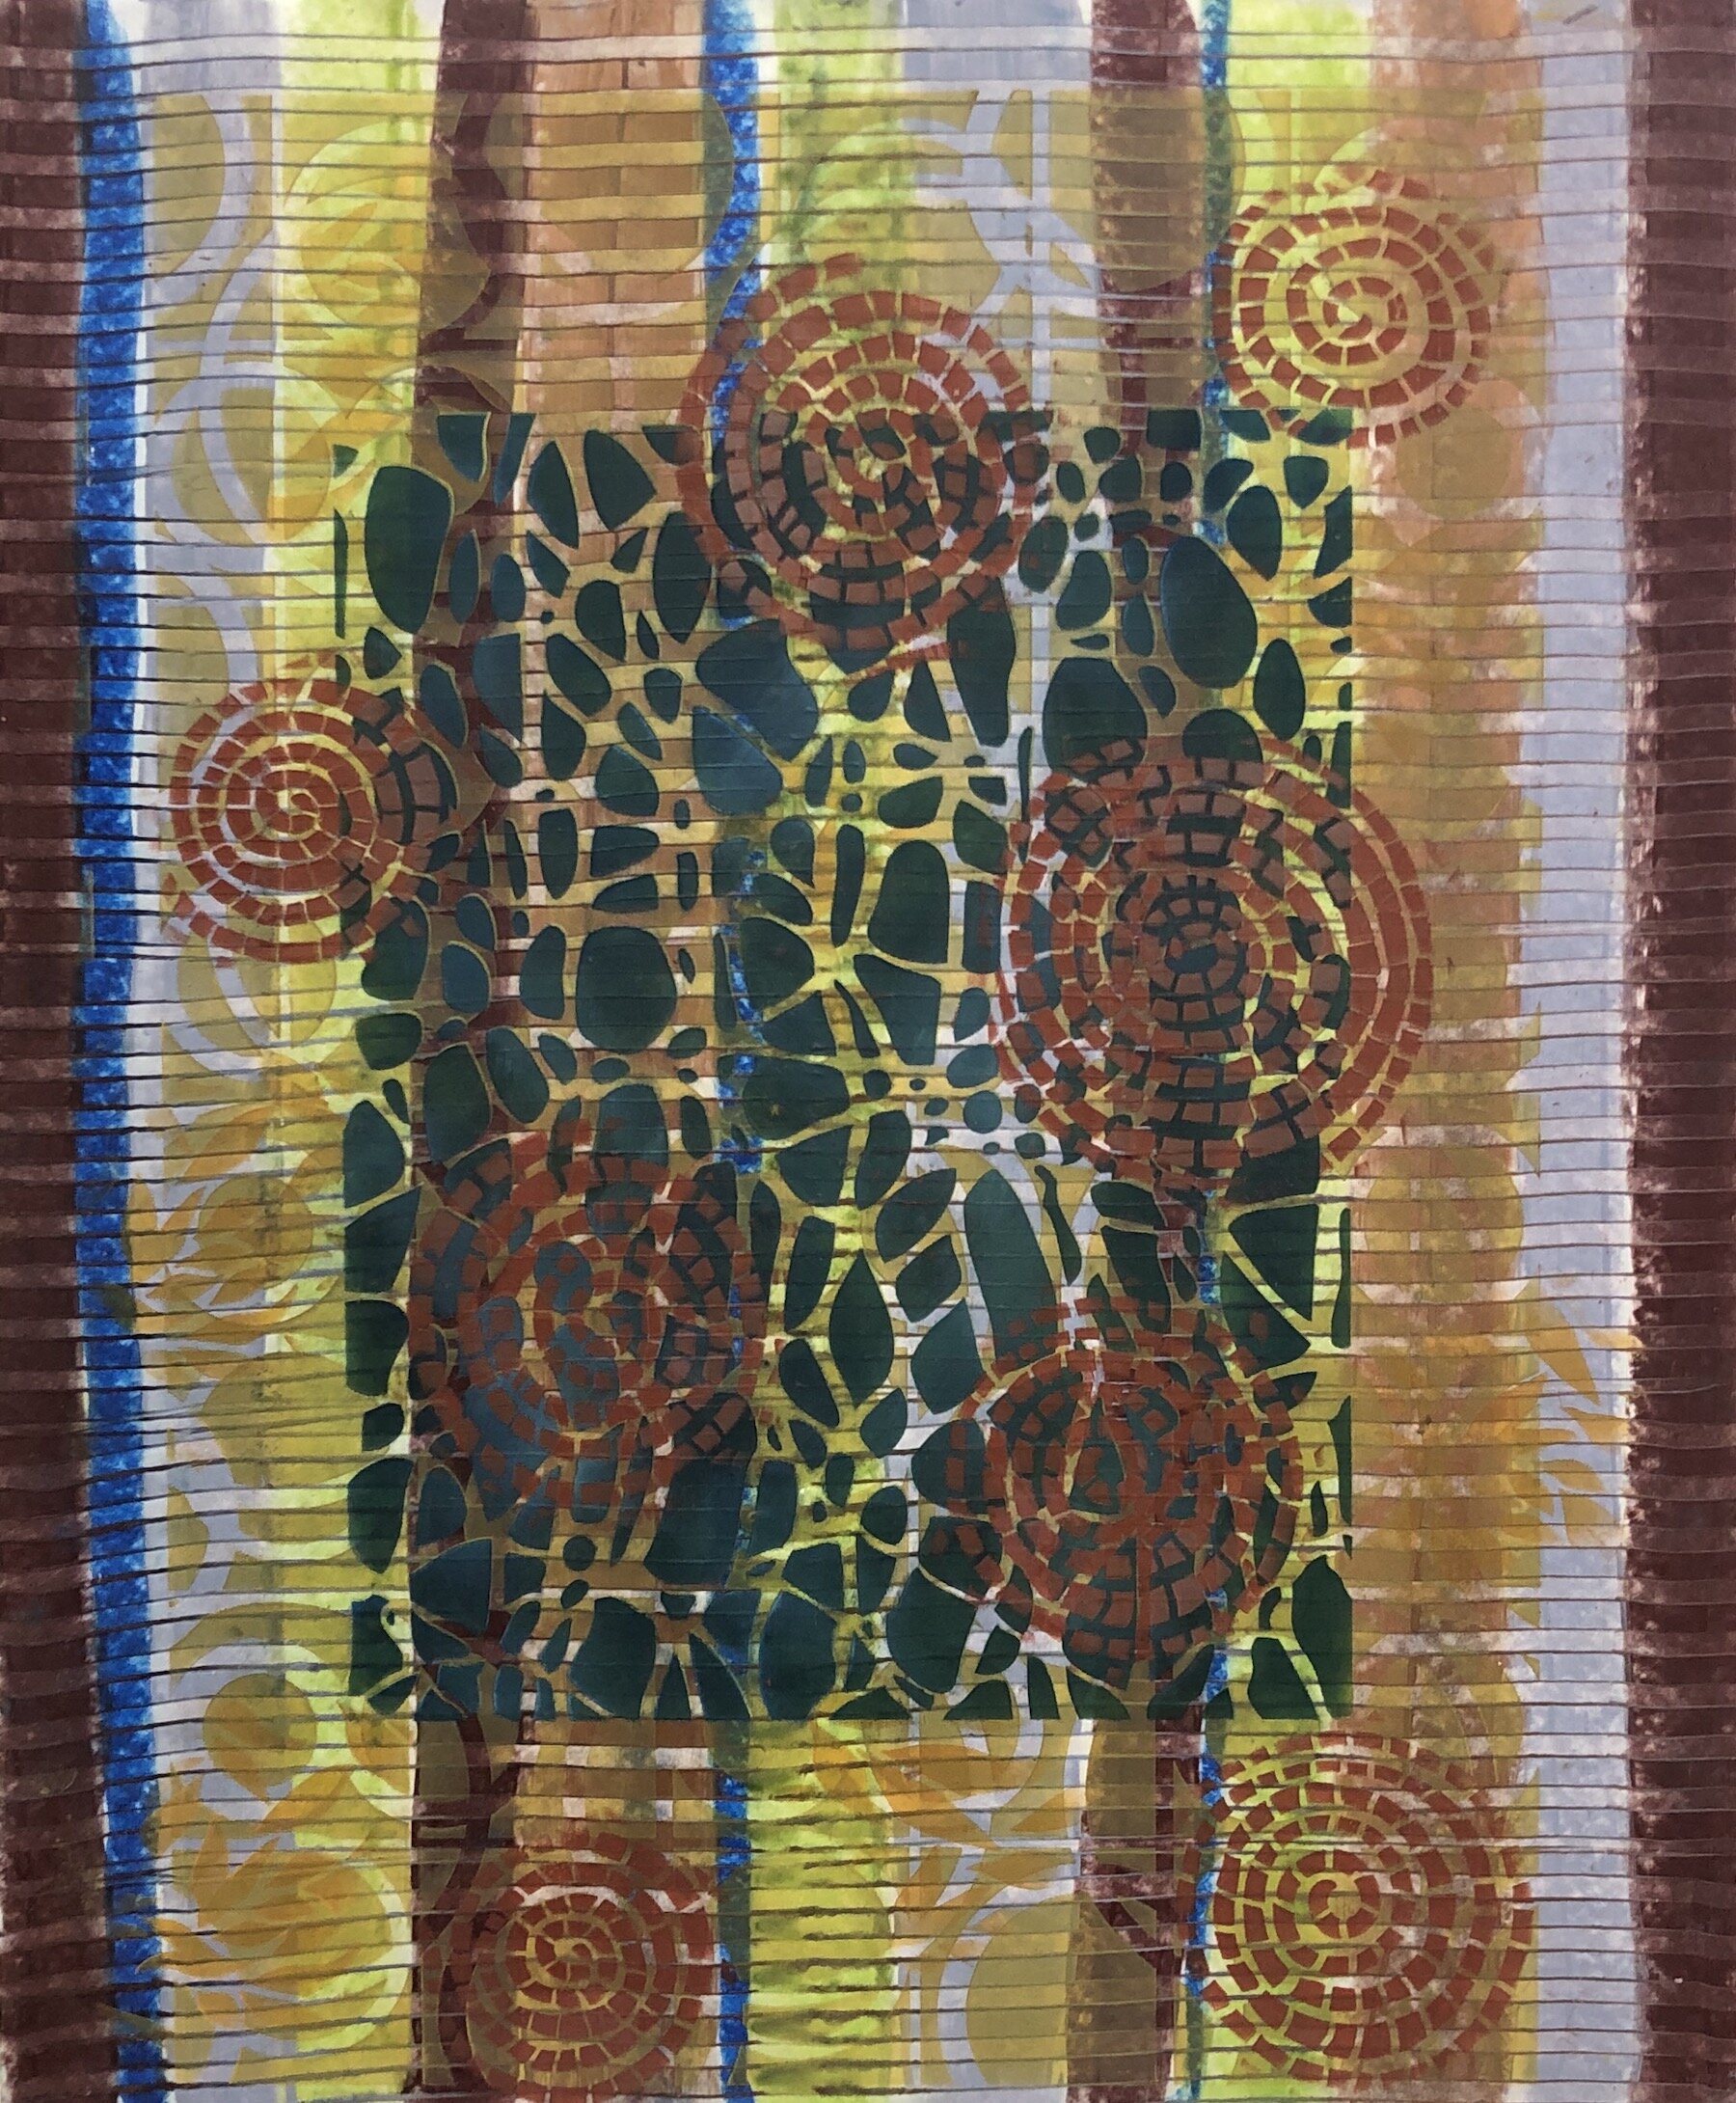    Patterns Layers 7    encaustic, pastel on paper, 17 x 14 inches 